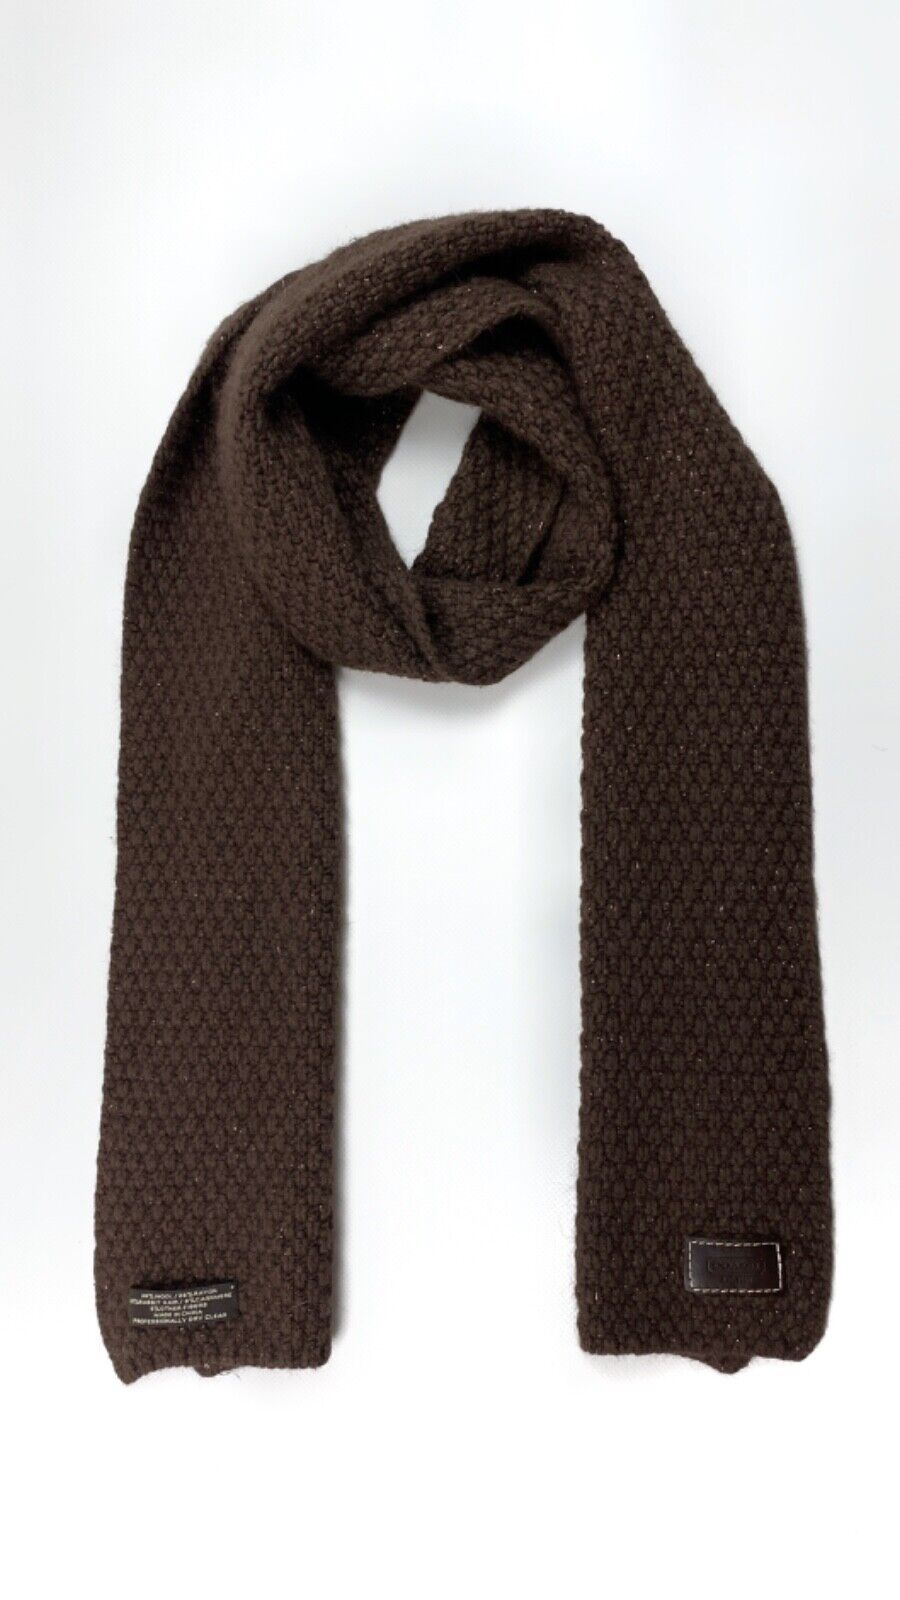 COACH Wool Cashmere Rabbit Hair Scarf Brown Color - image 5